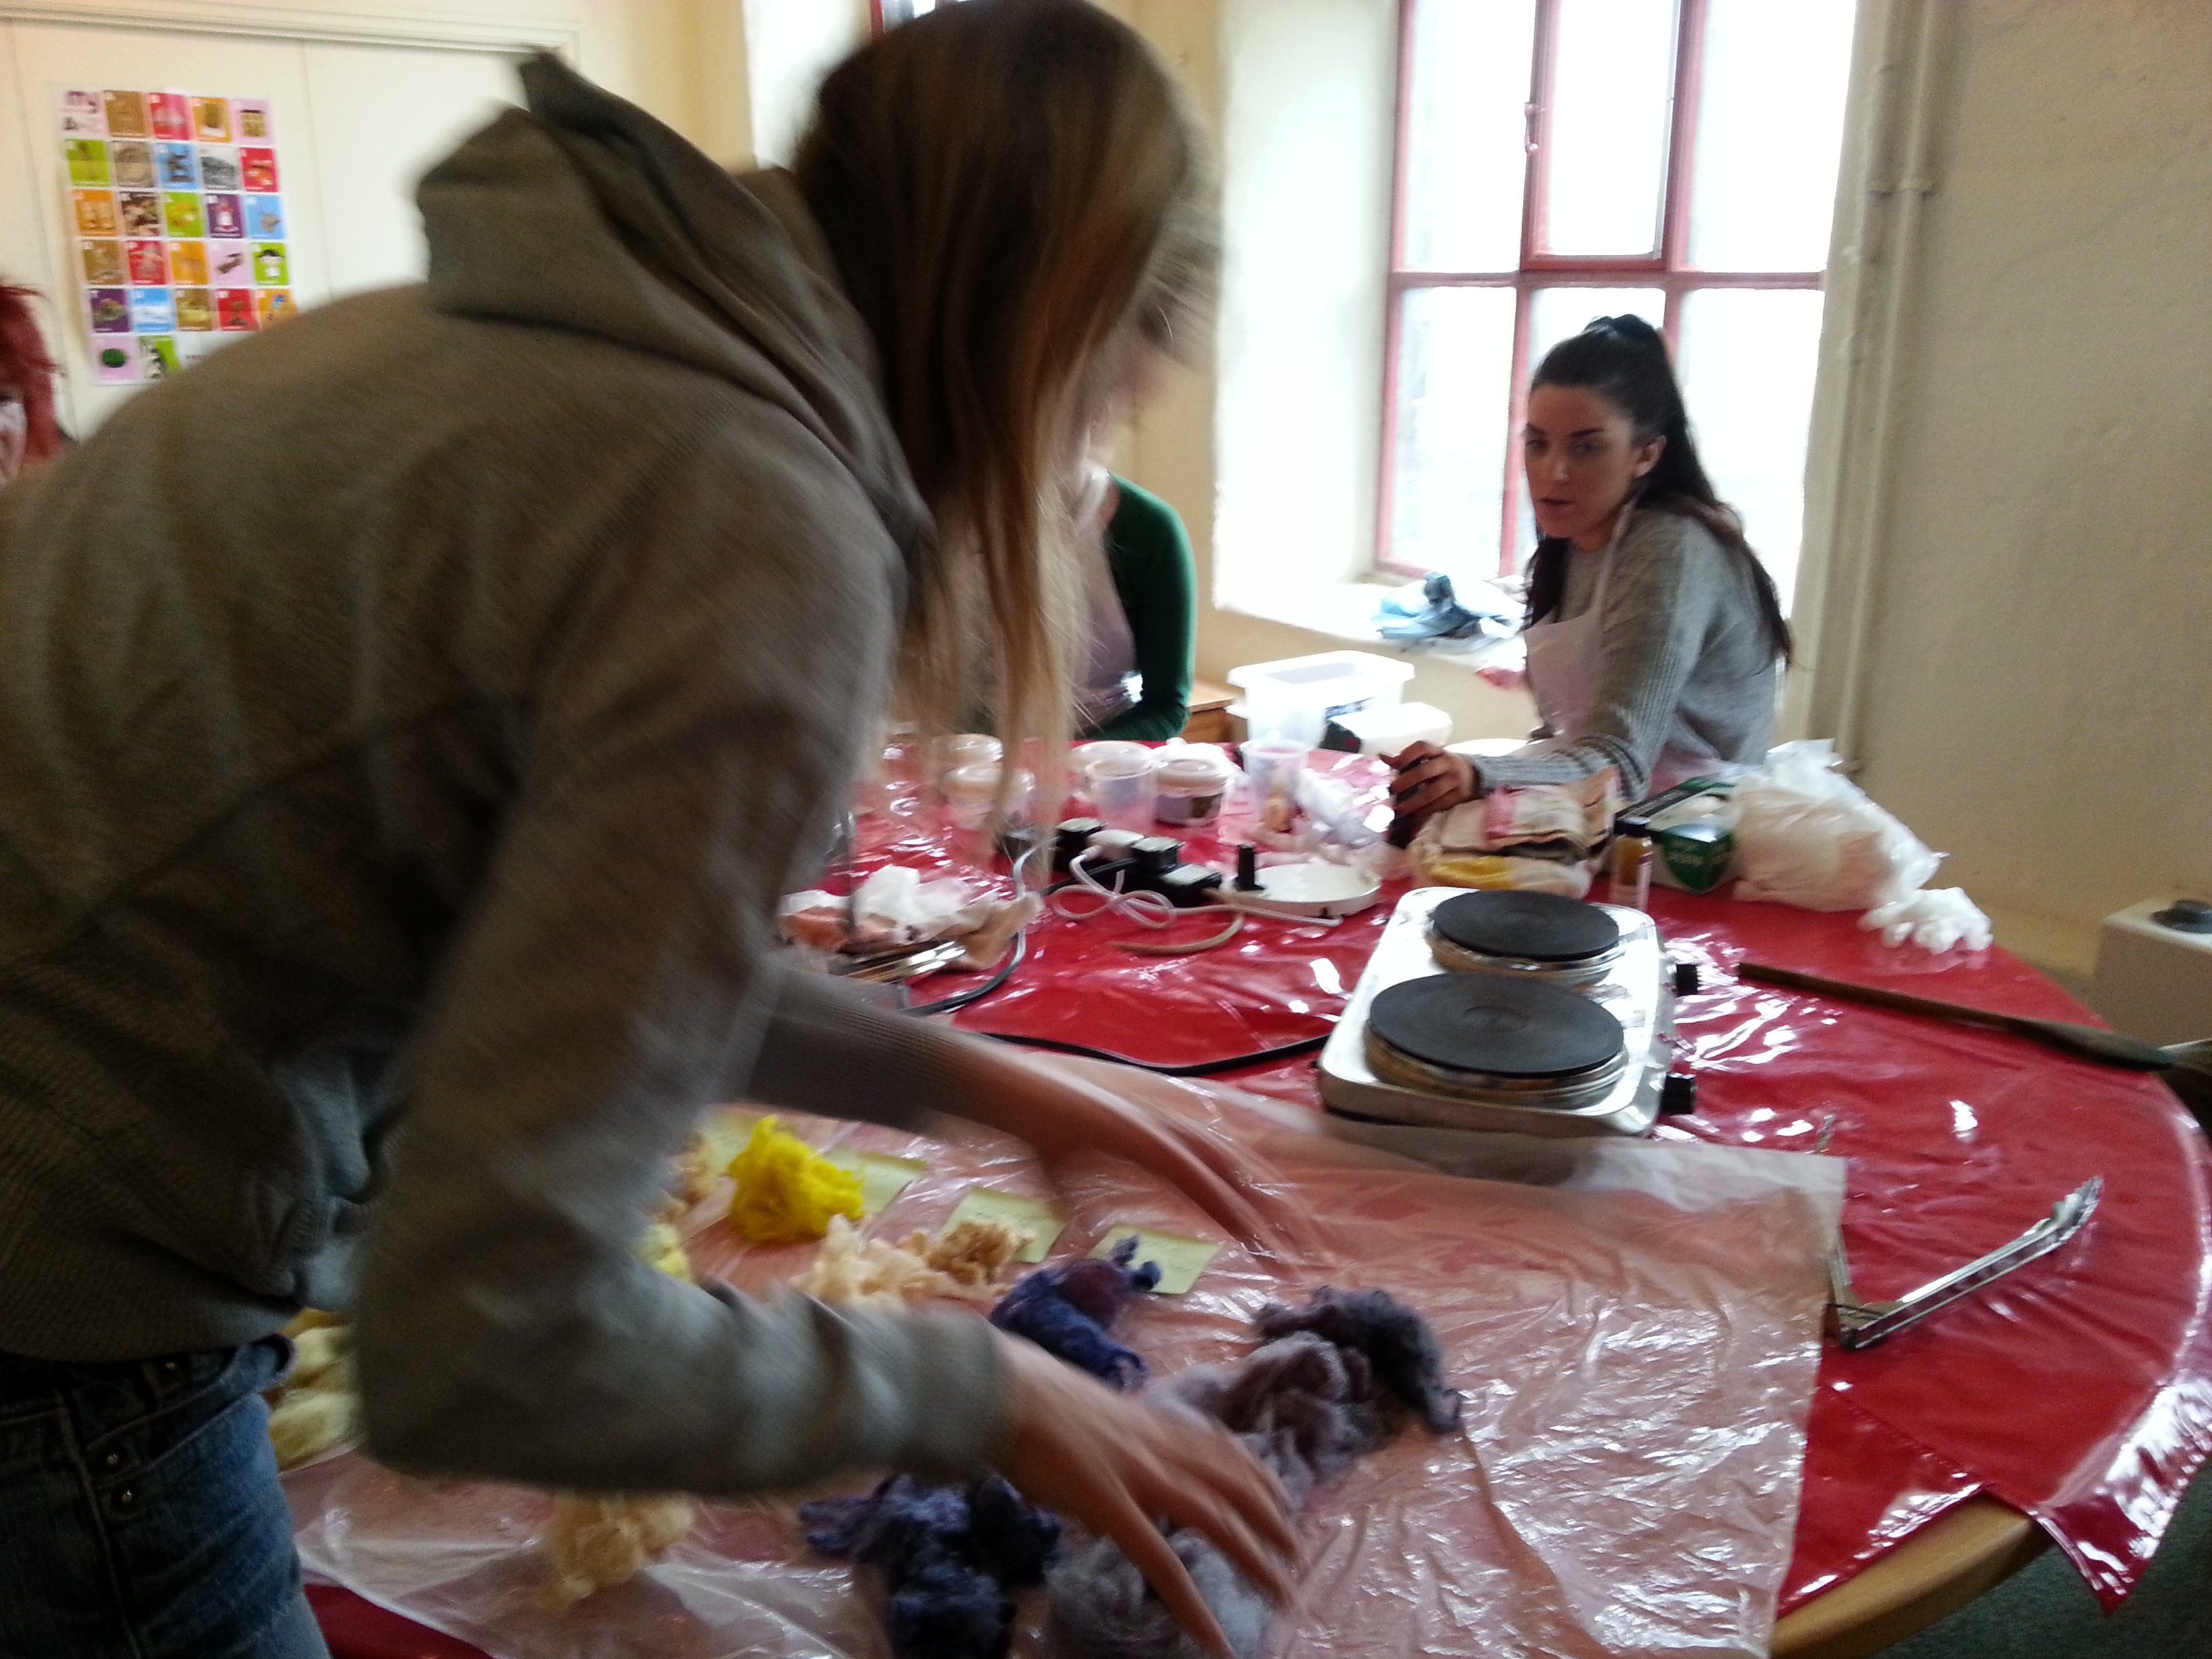 Community natural dyeing session at Armley Mills with Debbie Tomkies of Making Futures